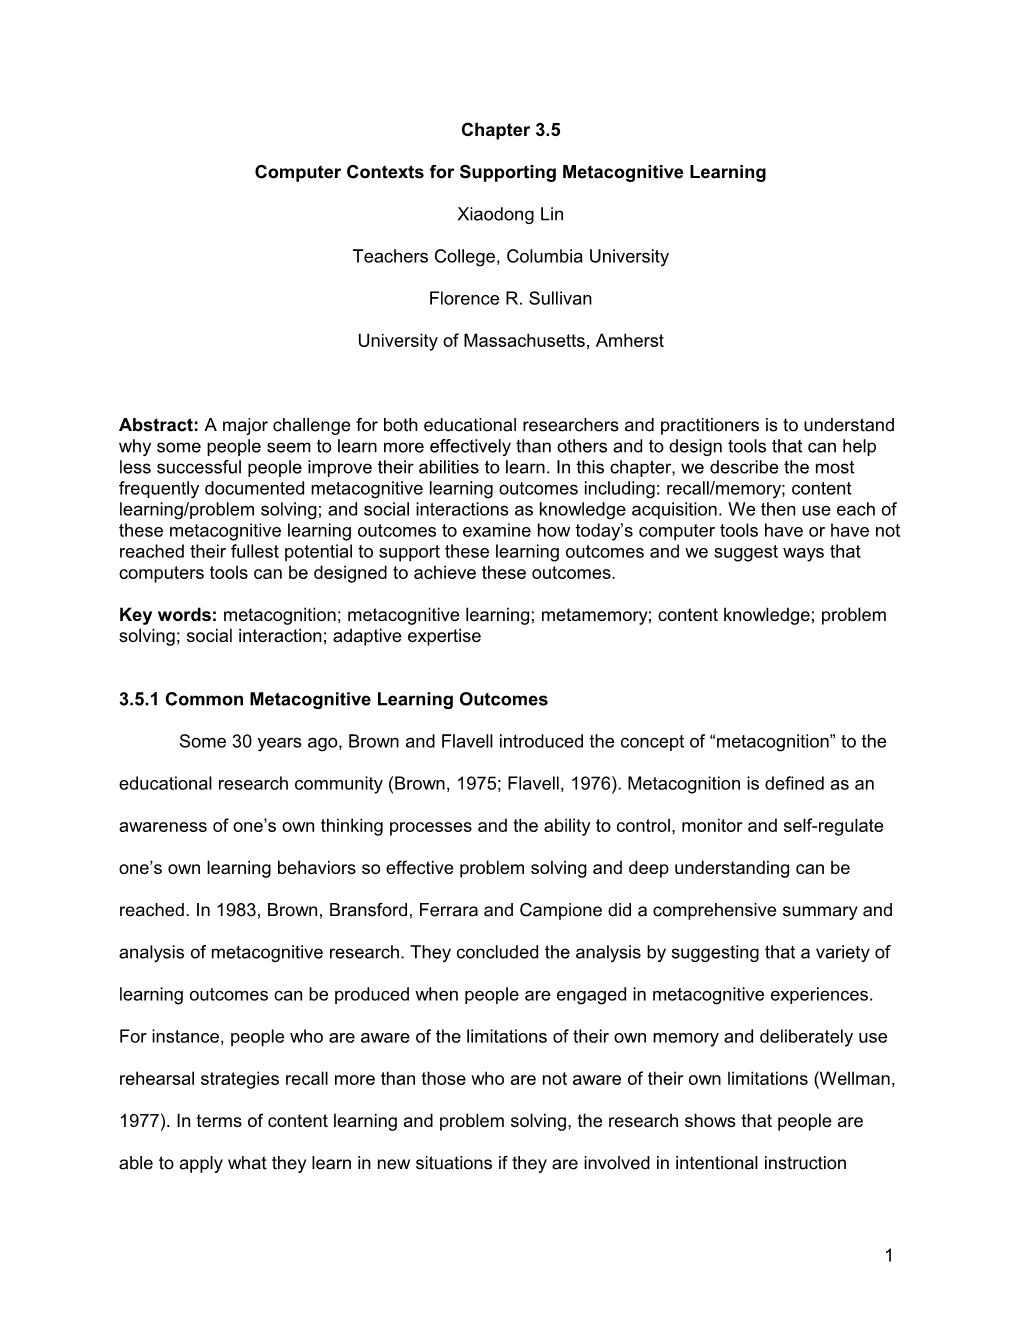 Computer Contexts for Supporting Metacognitive Learning